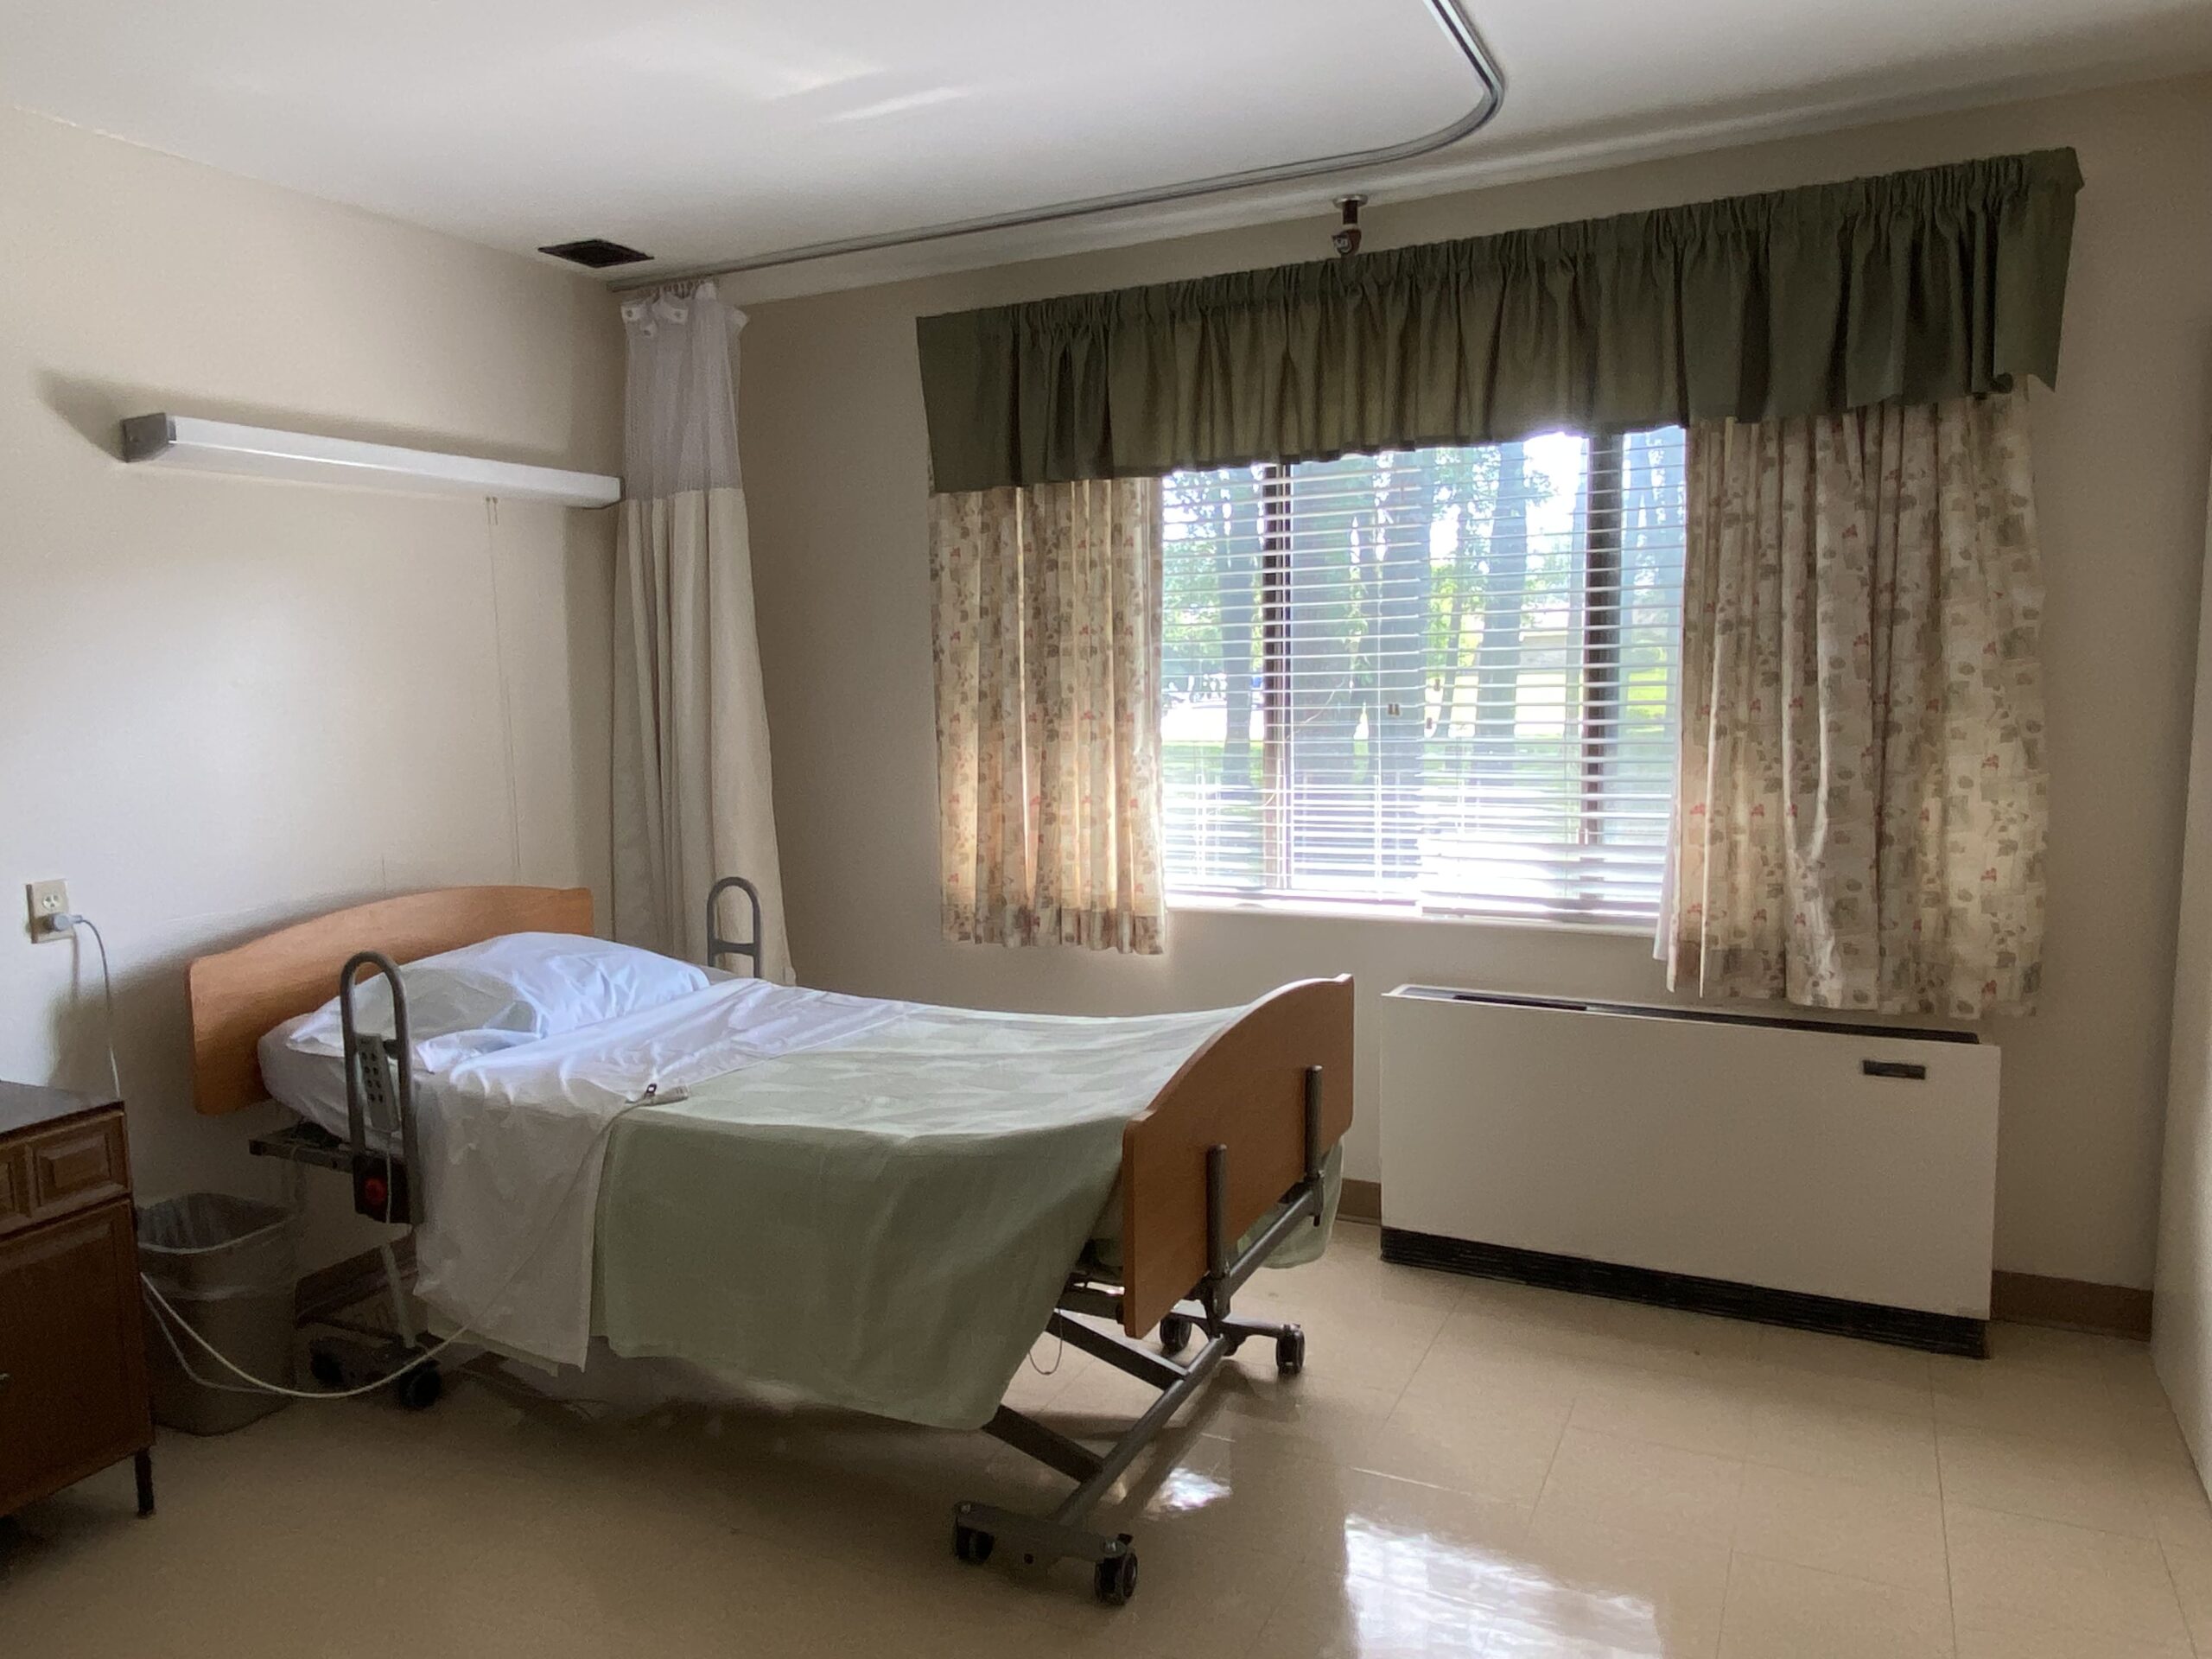 Brickyard Healthcare Fountainview Care Center unoccupied resident bedroom suite